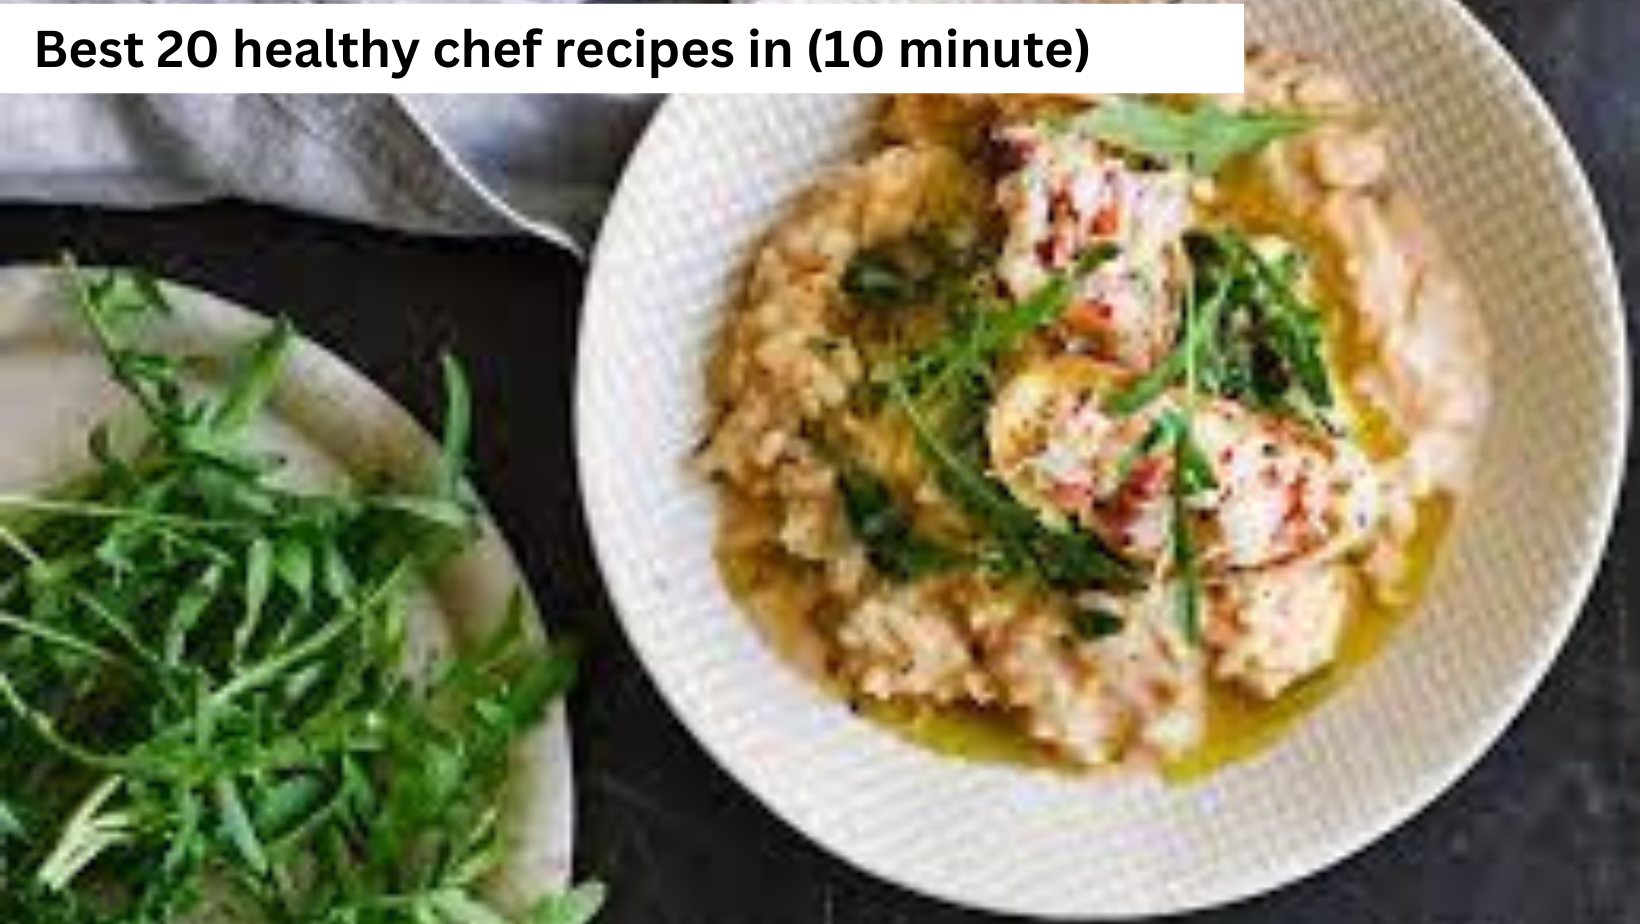 Best 20 healthy chef recipes in (10 minute)